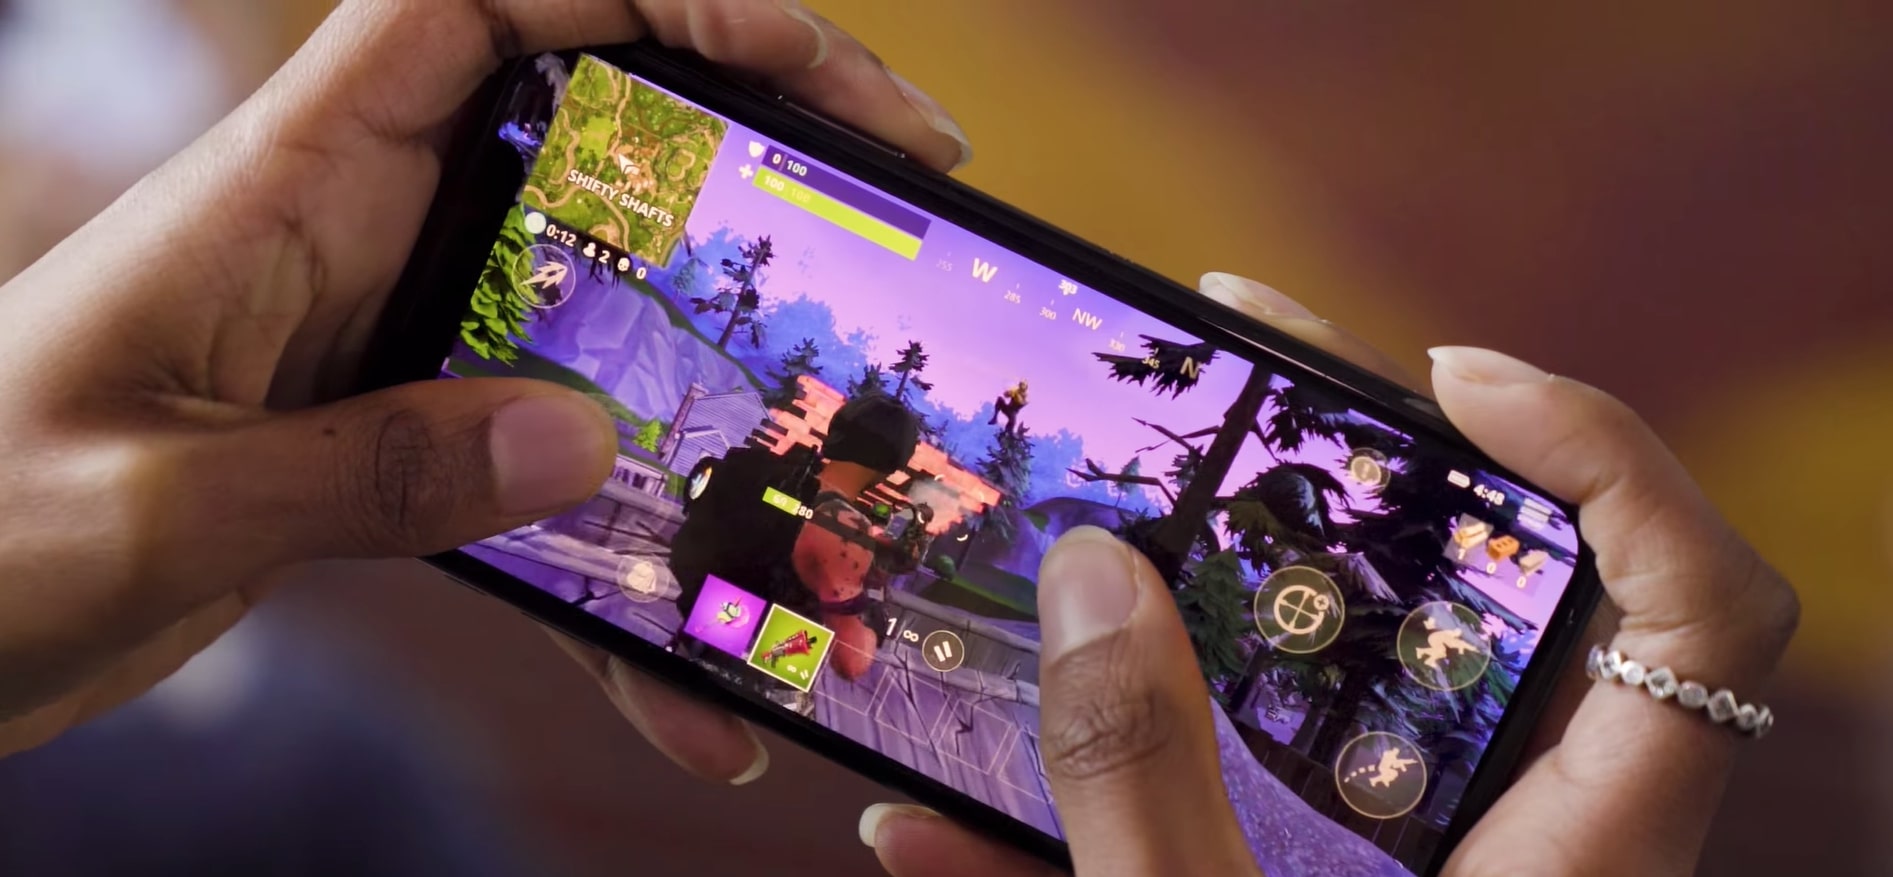 Epic Games sues Google after Fortnite is booted from the Play Store